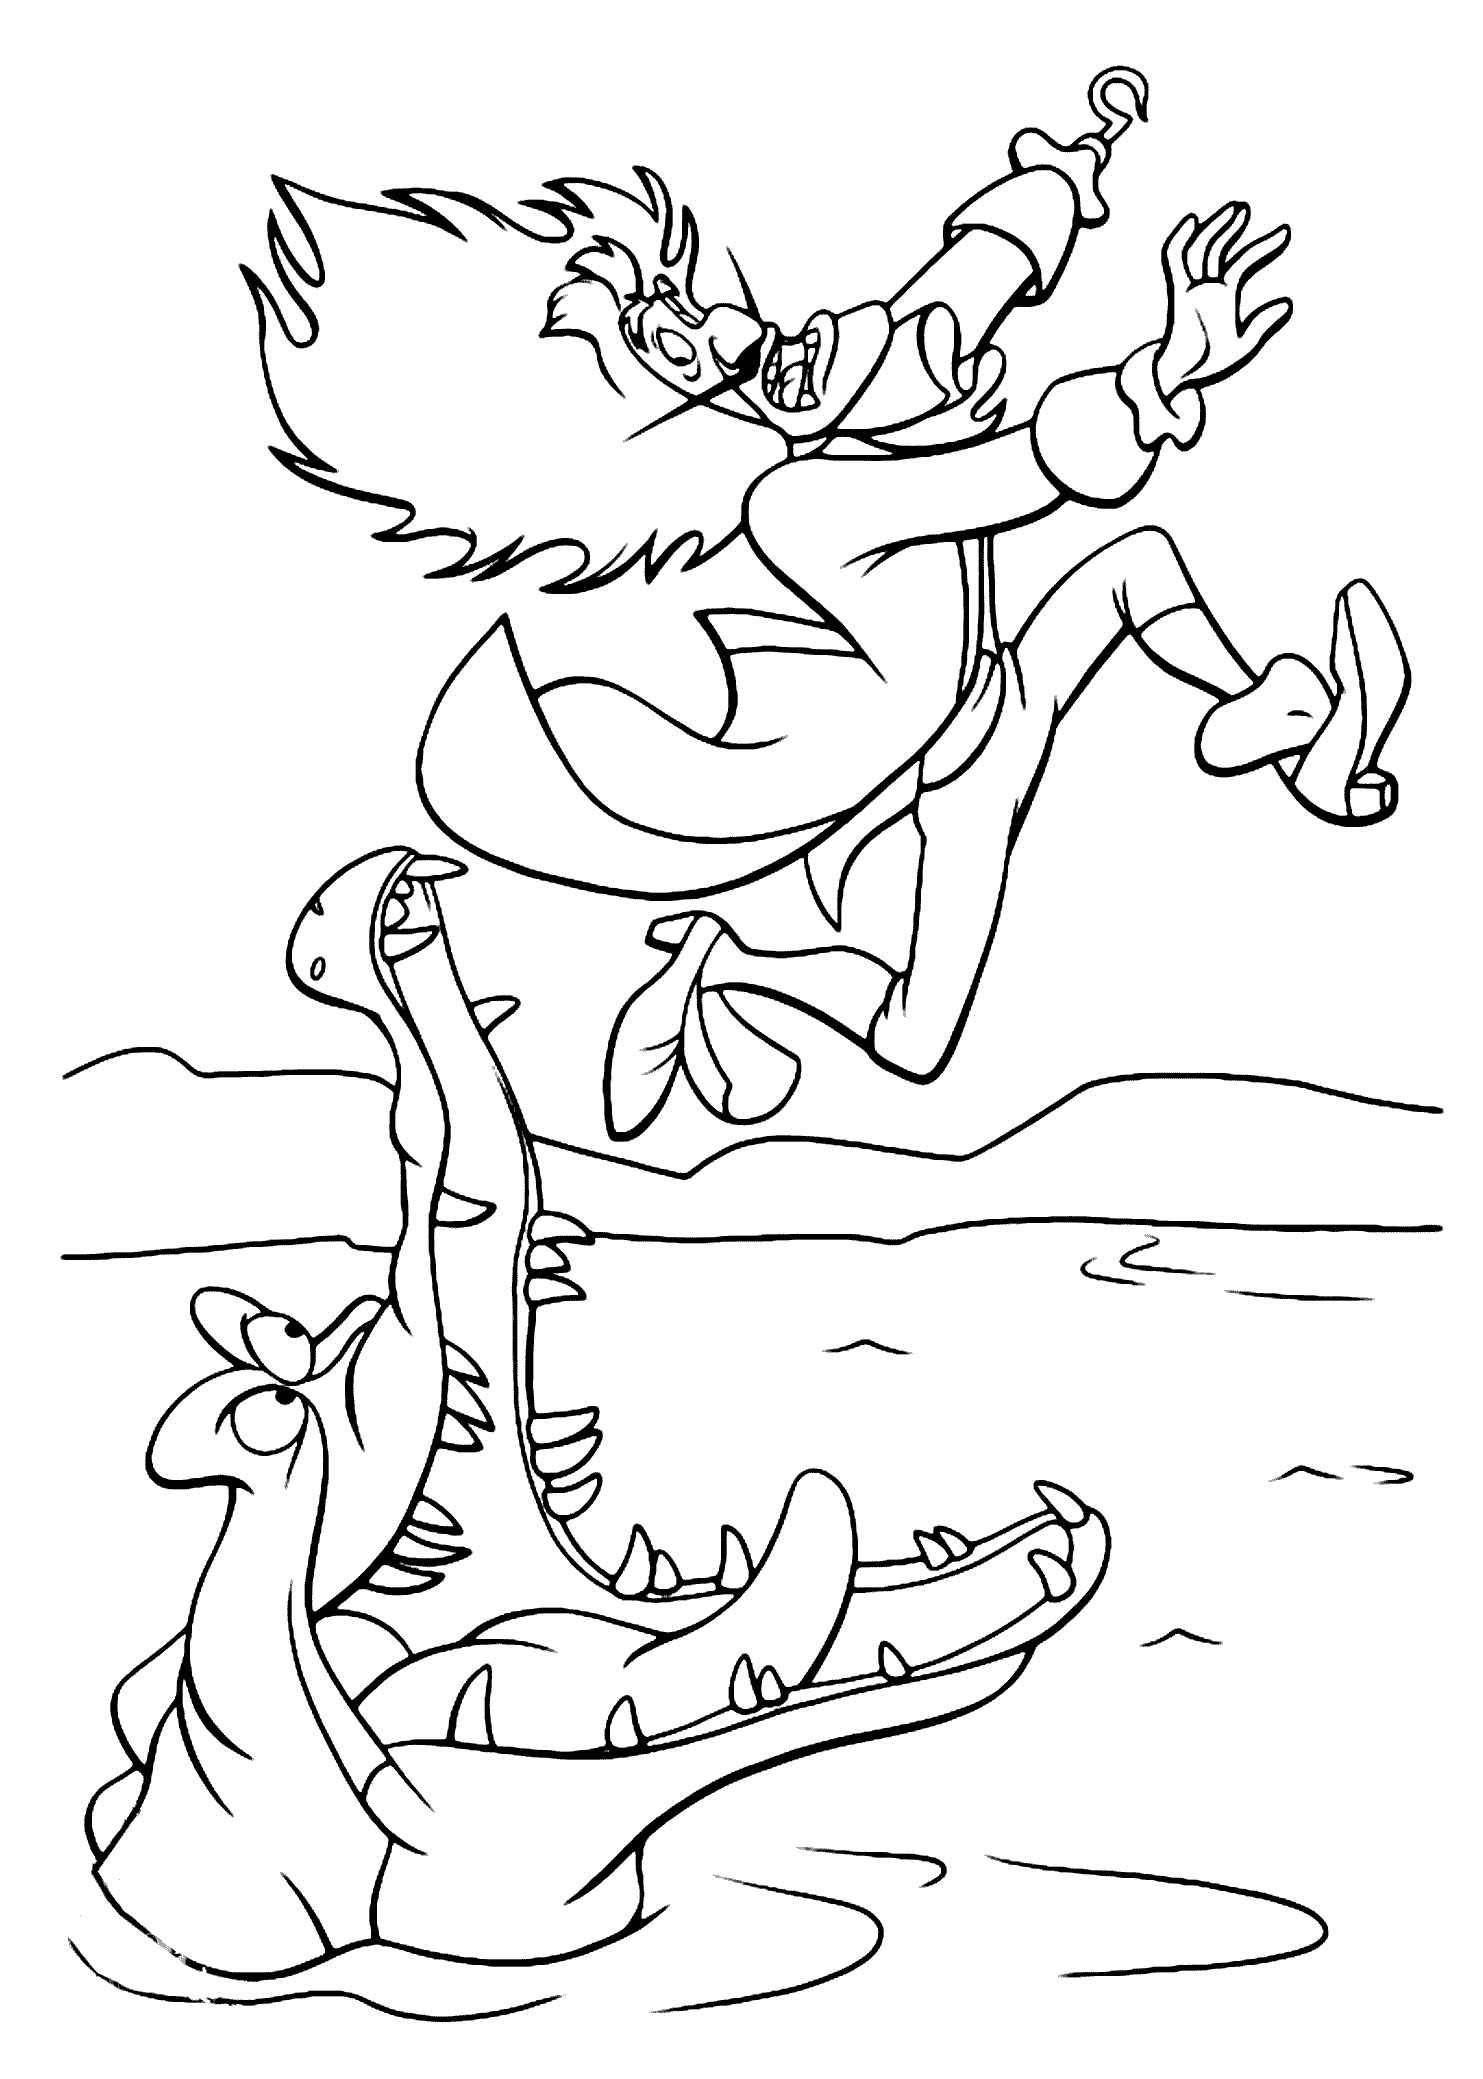 Related Peter Pan Coloring Pages item-6265, Peter Pan Coloring ...